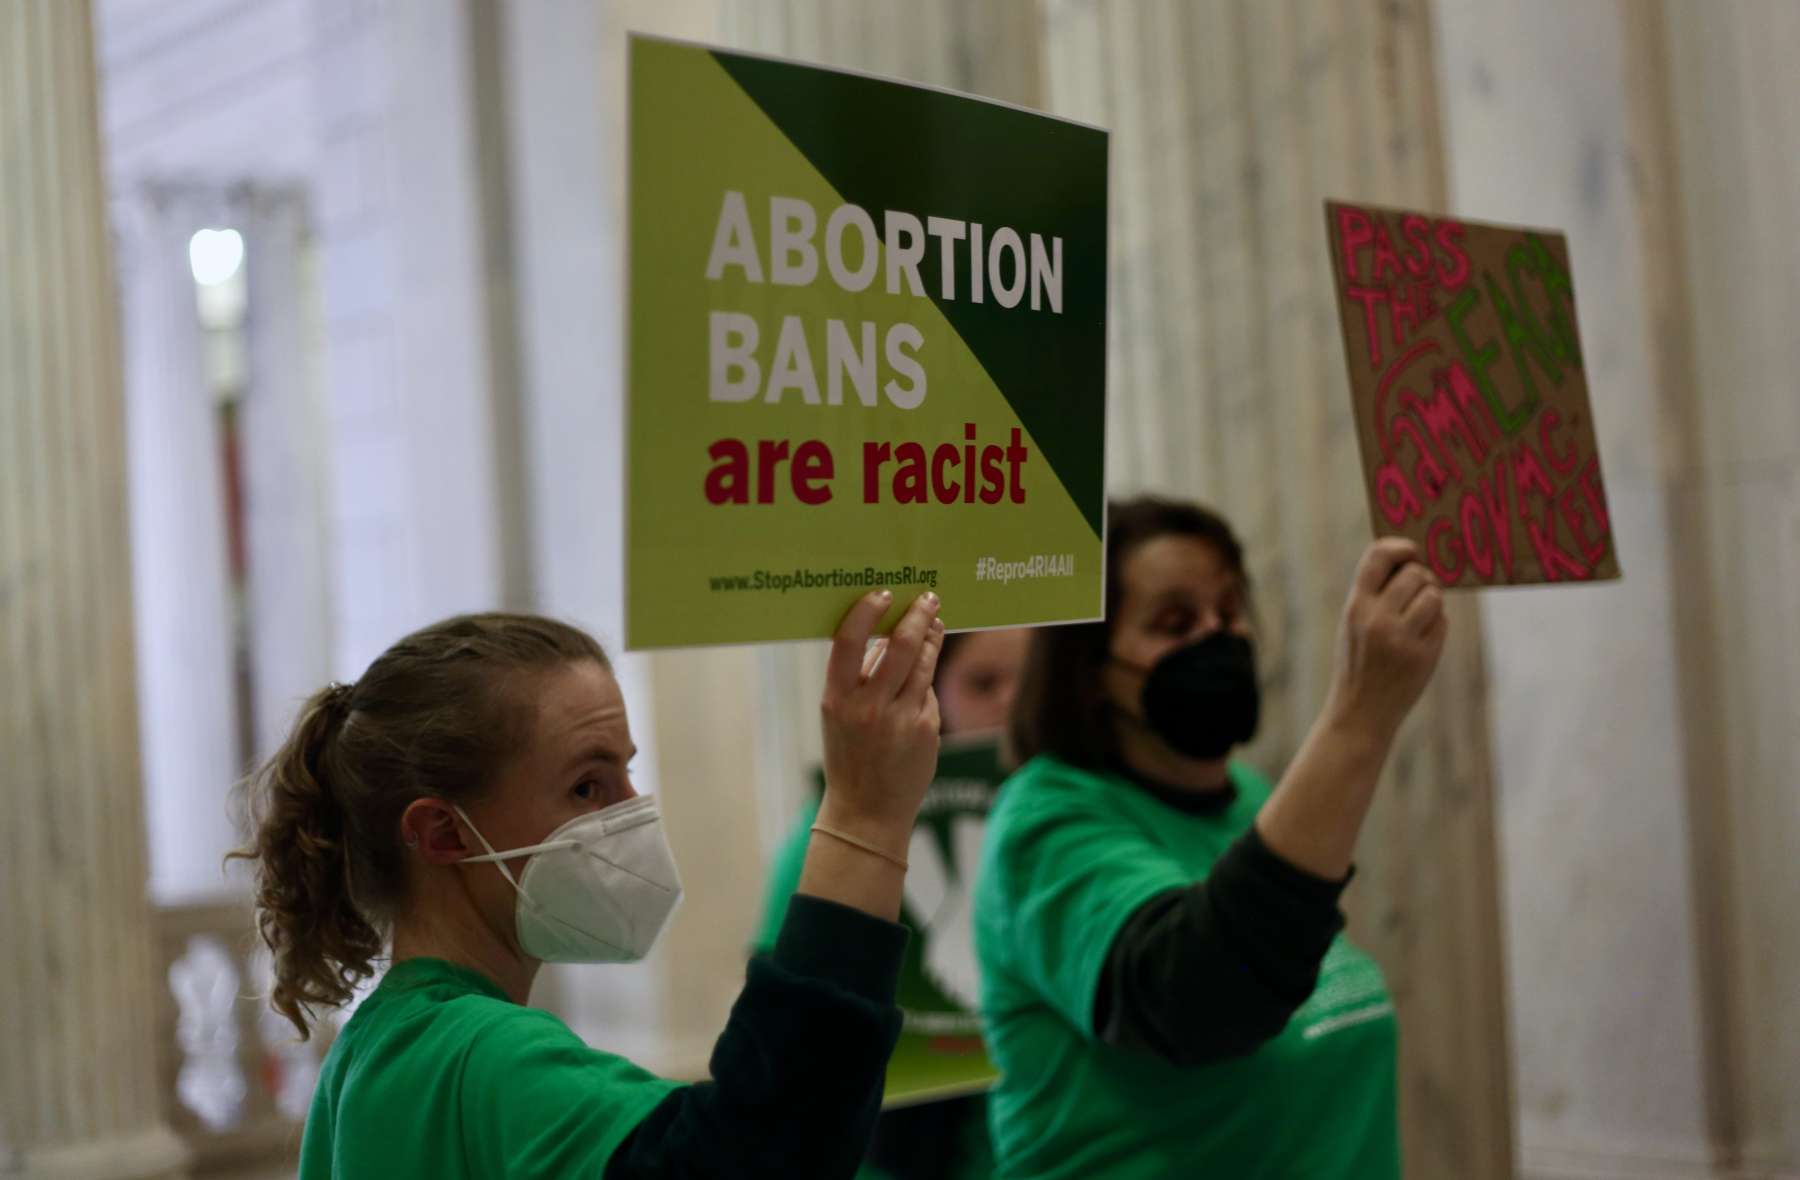 Rhode Island News: Rep Kazarian introduces Equality in Abortion Coverage Act